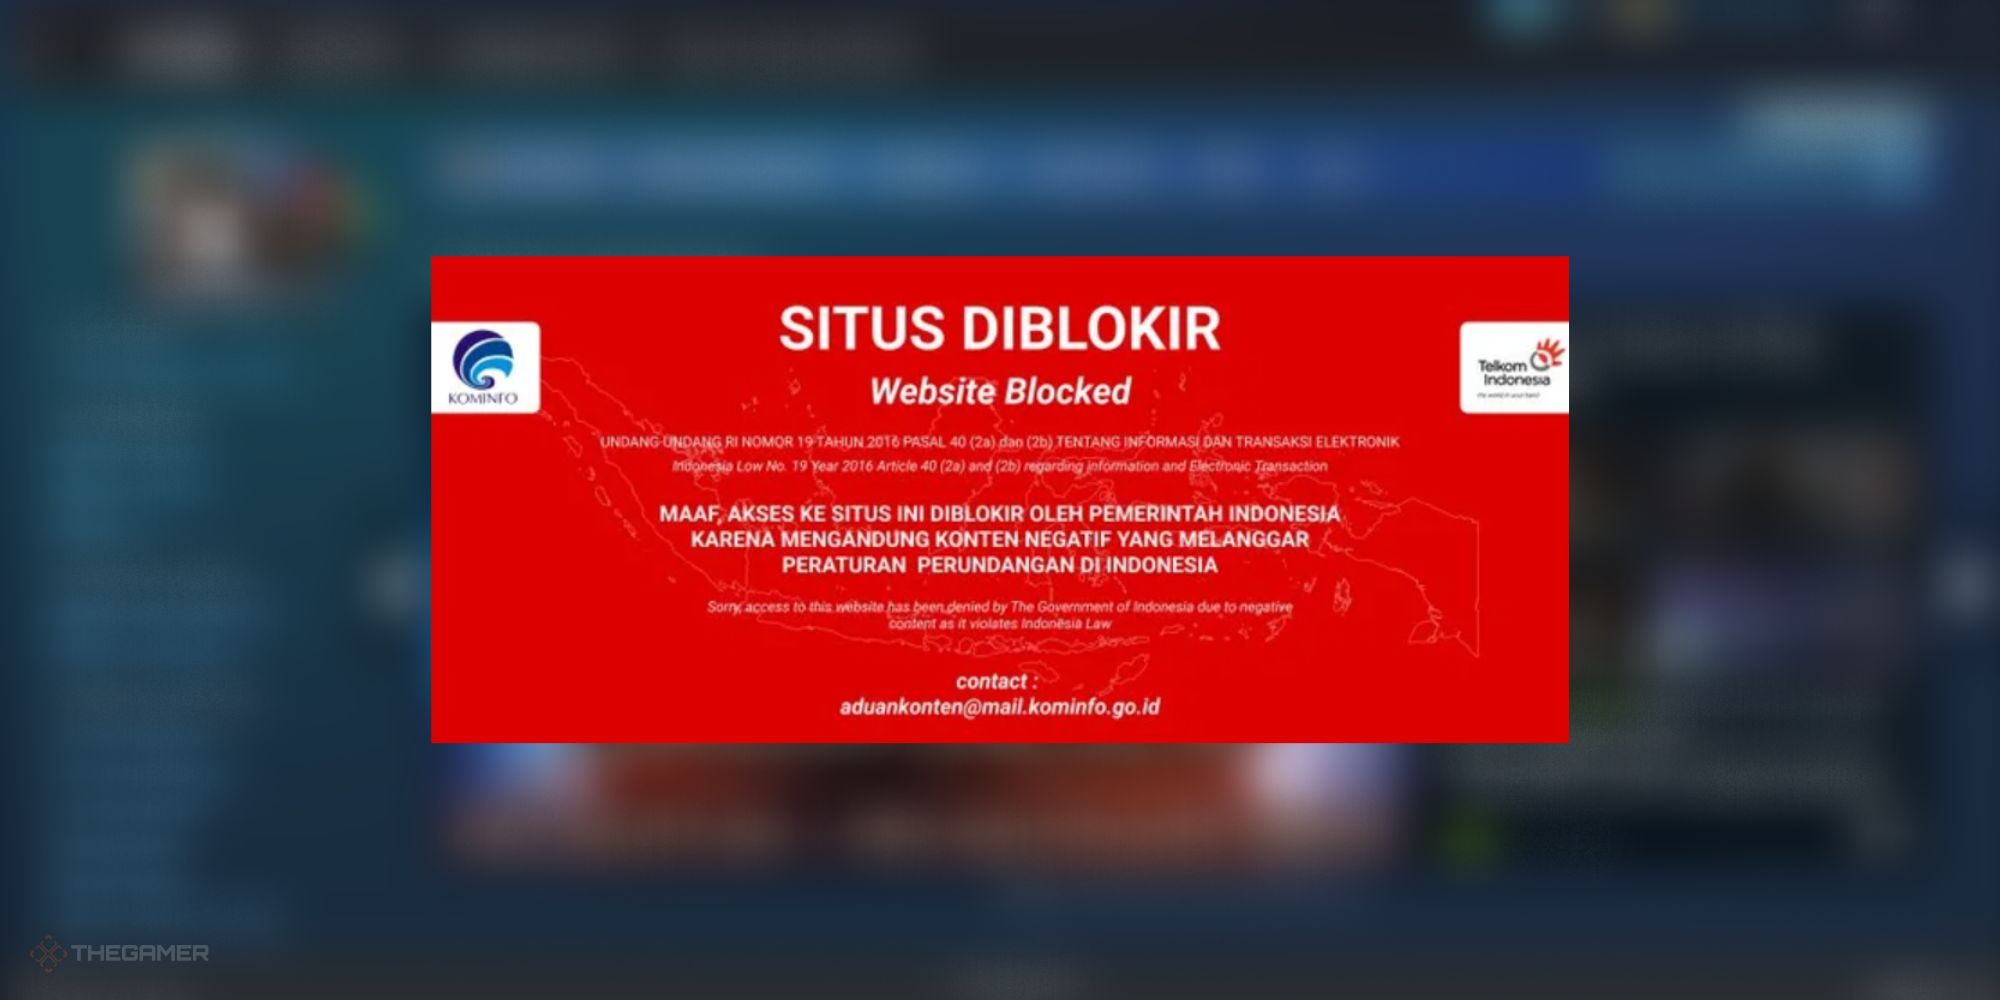 Why Steam banned in indonesia?